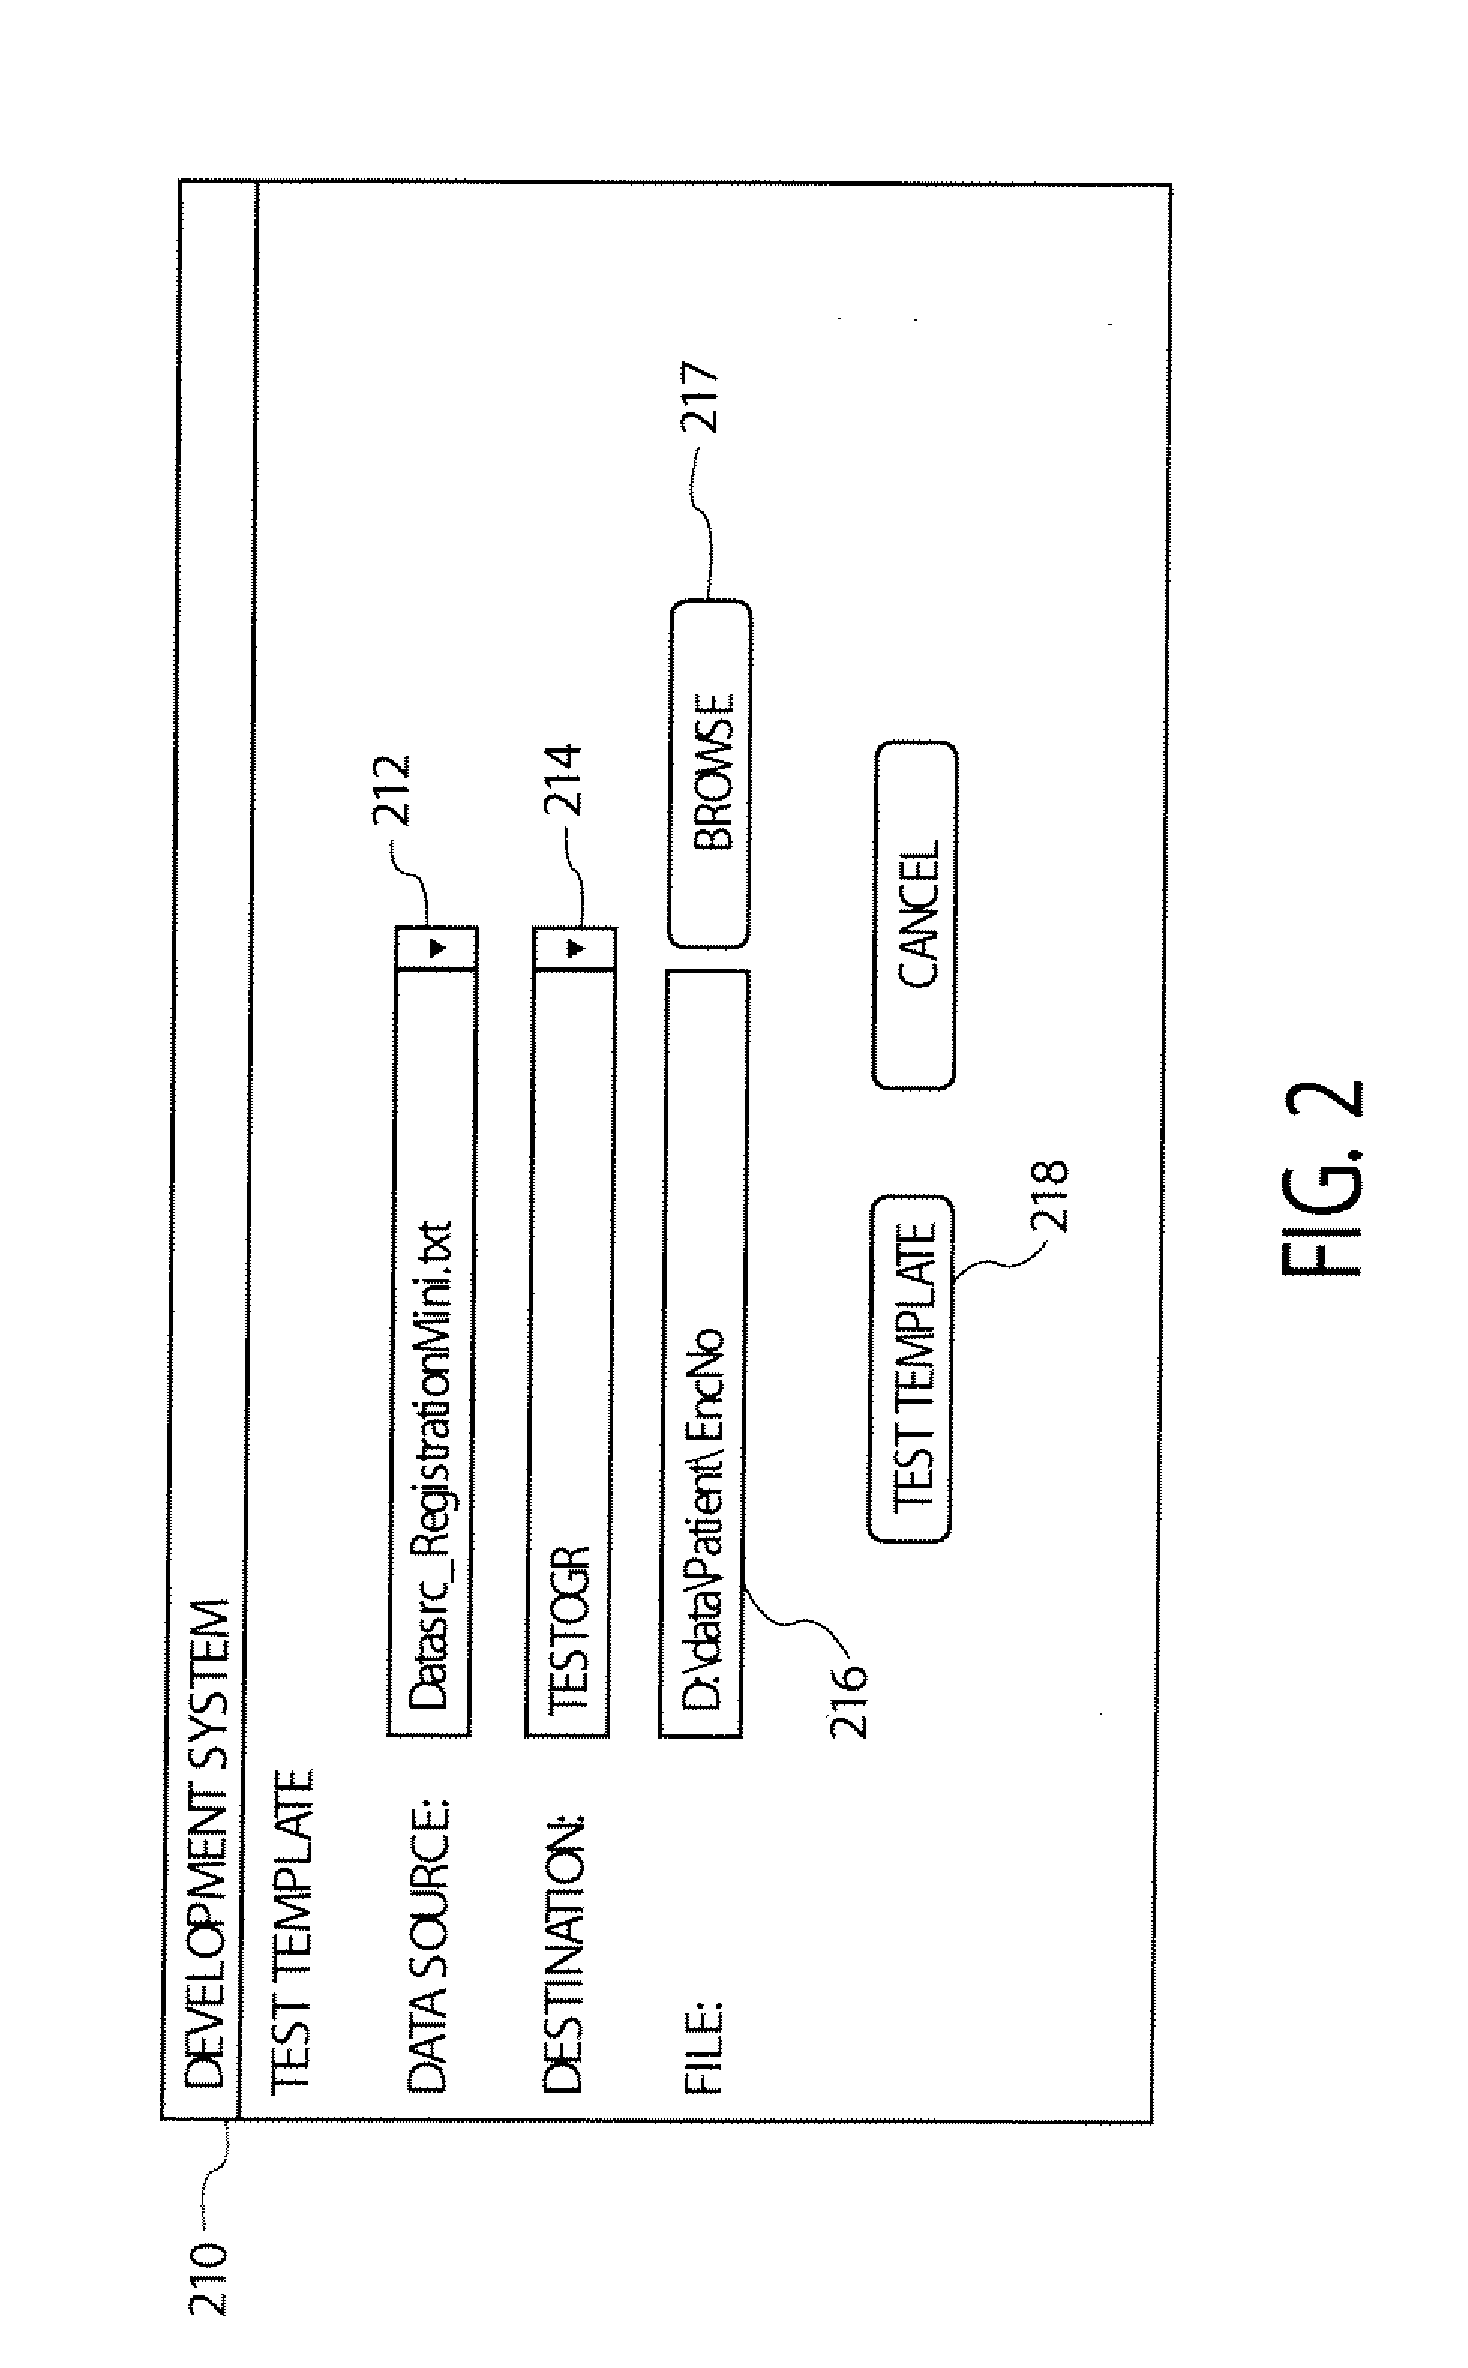 System for Processing and Testing of Electronic Forms and Associated Templates